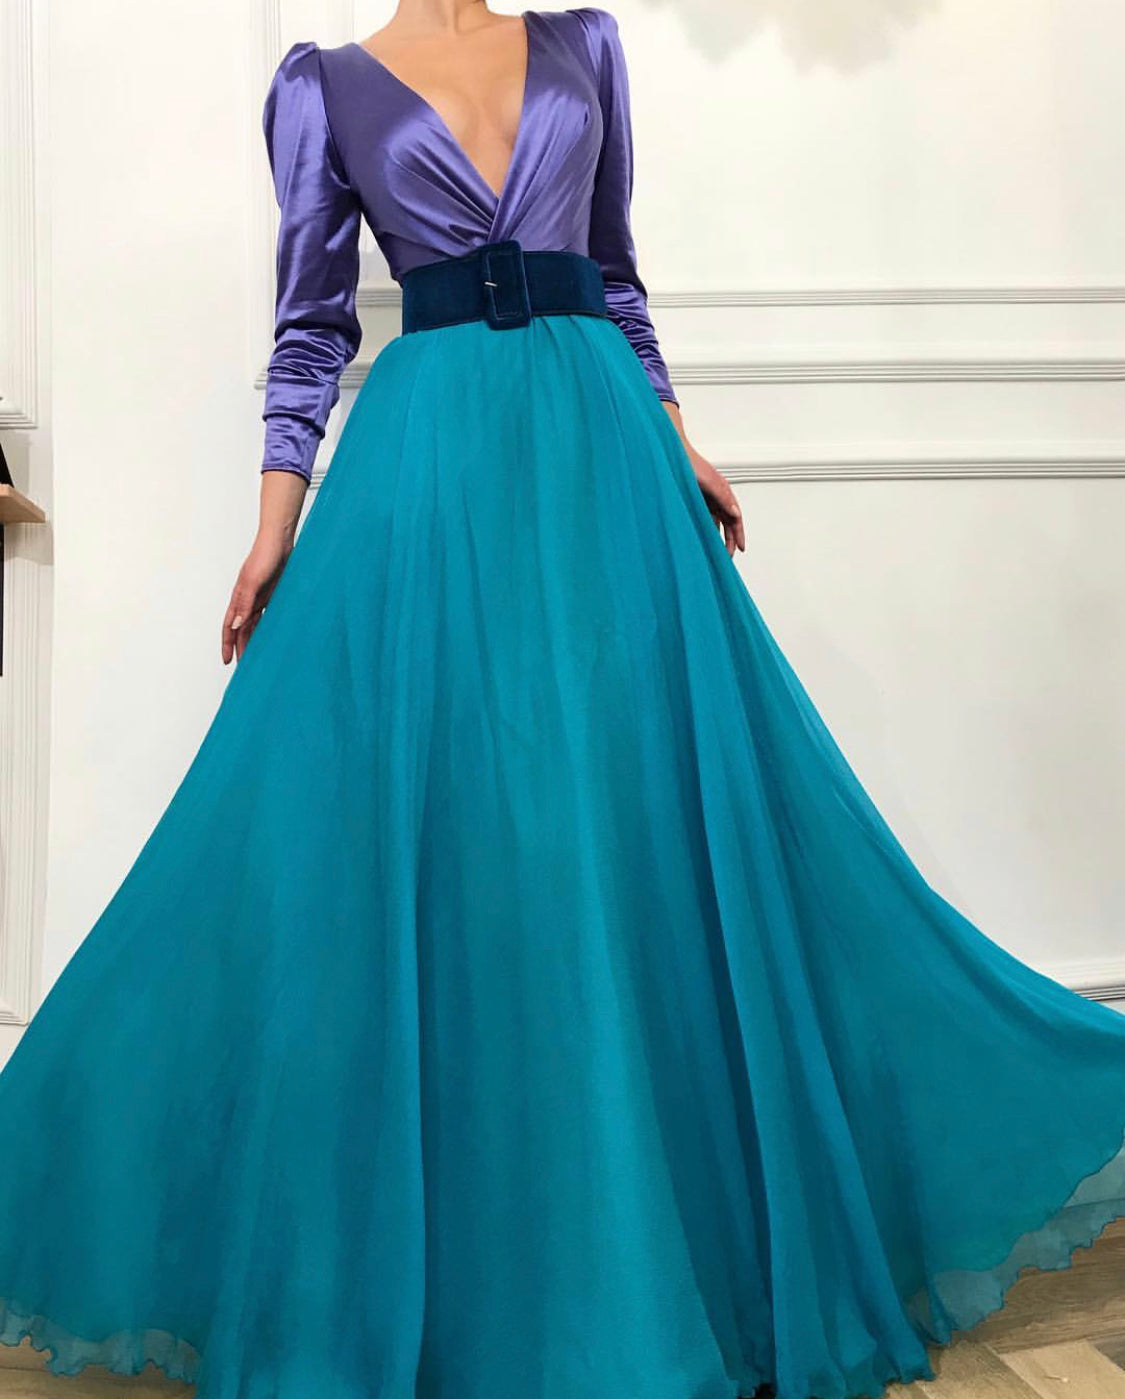 Blue and purple A-Line dress with v-neck, long sleeves and belt